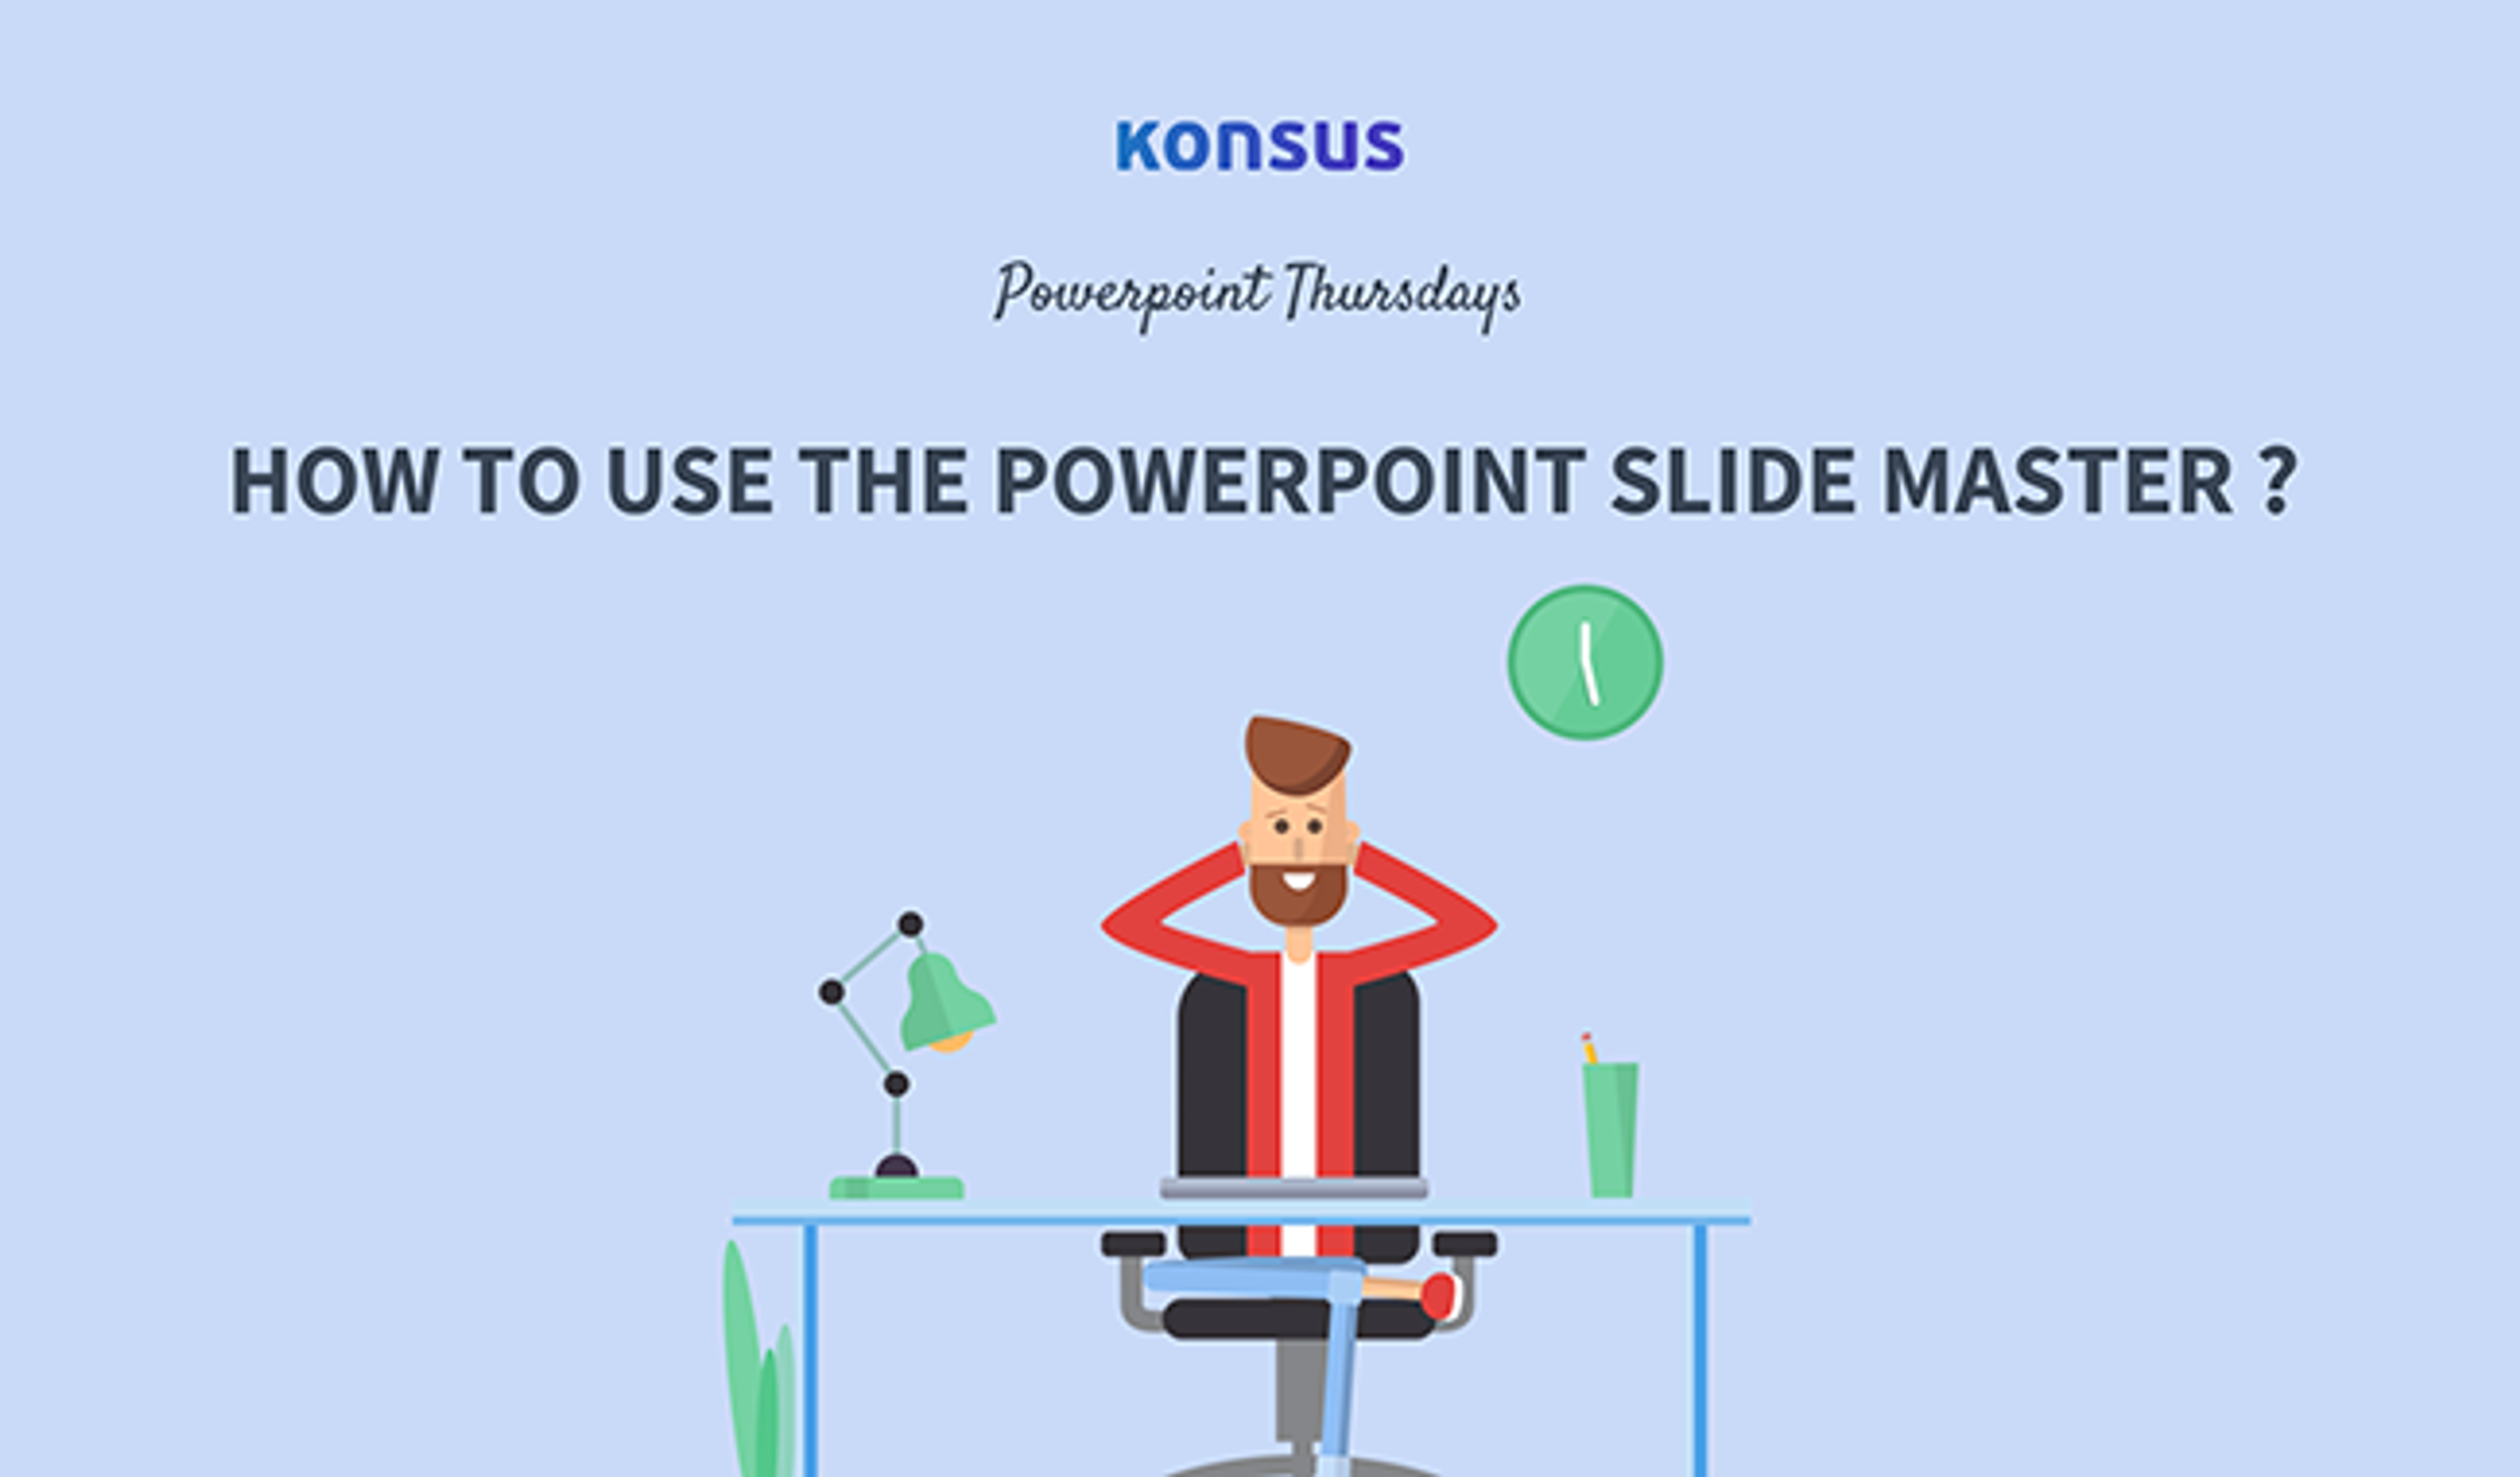 How To Use PowerPoint Slide Master - Video Tutorial